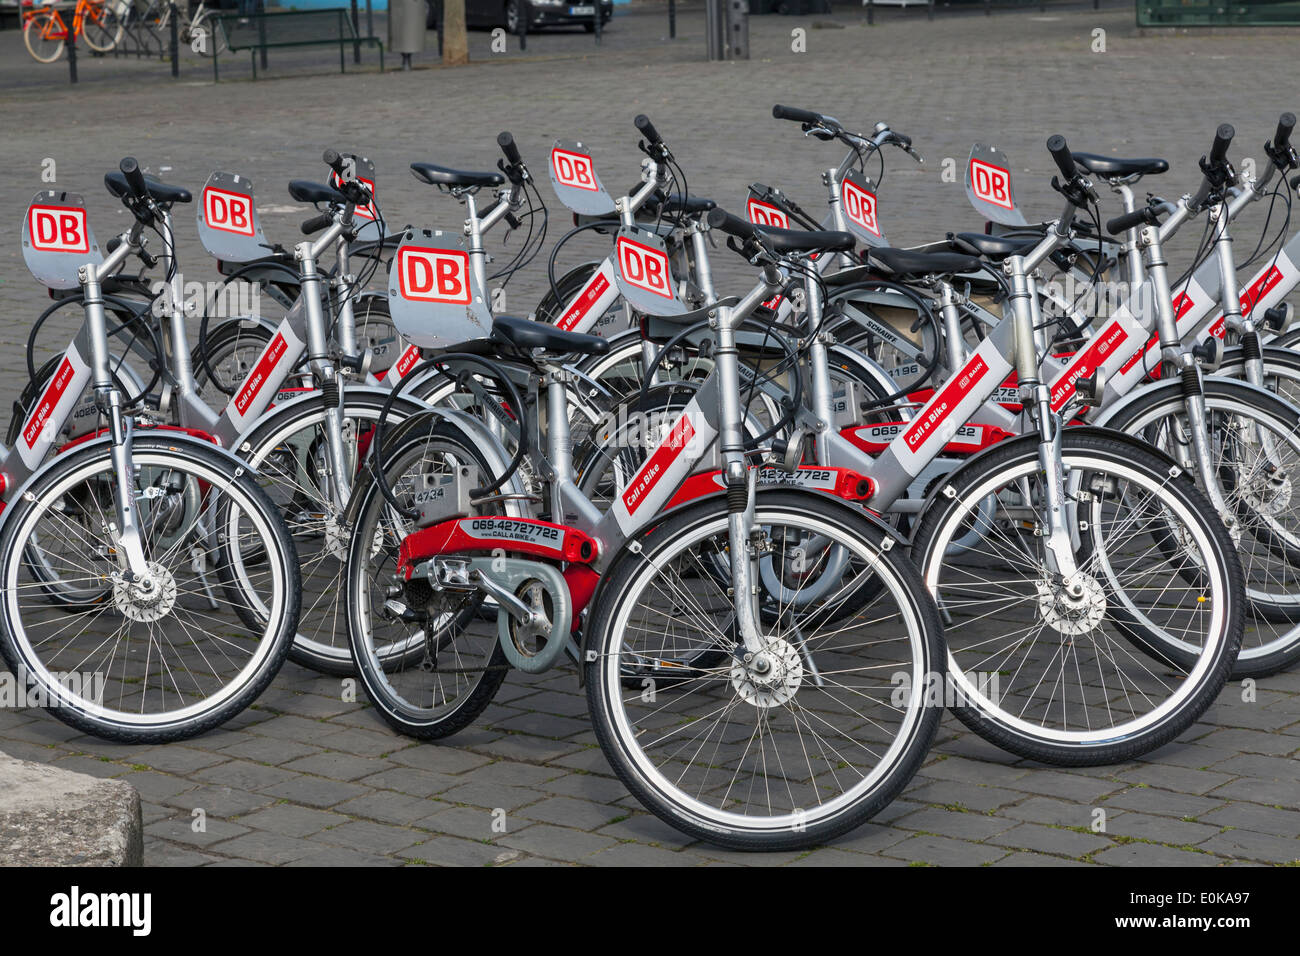 Db Bikes High Resolution Stock Photography and Images - Alamy